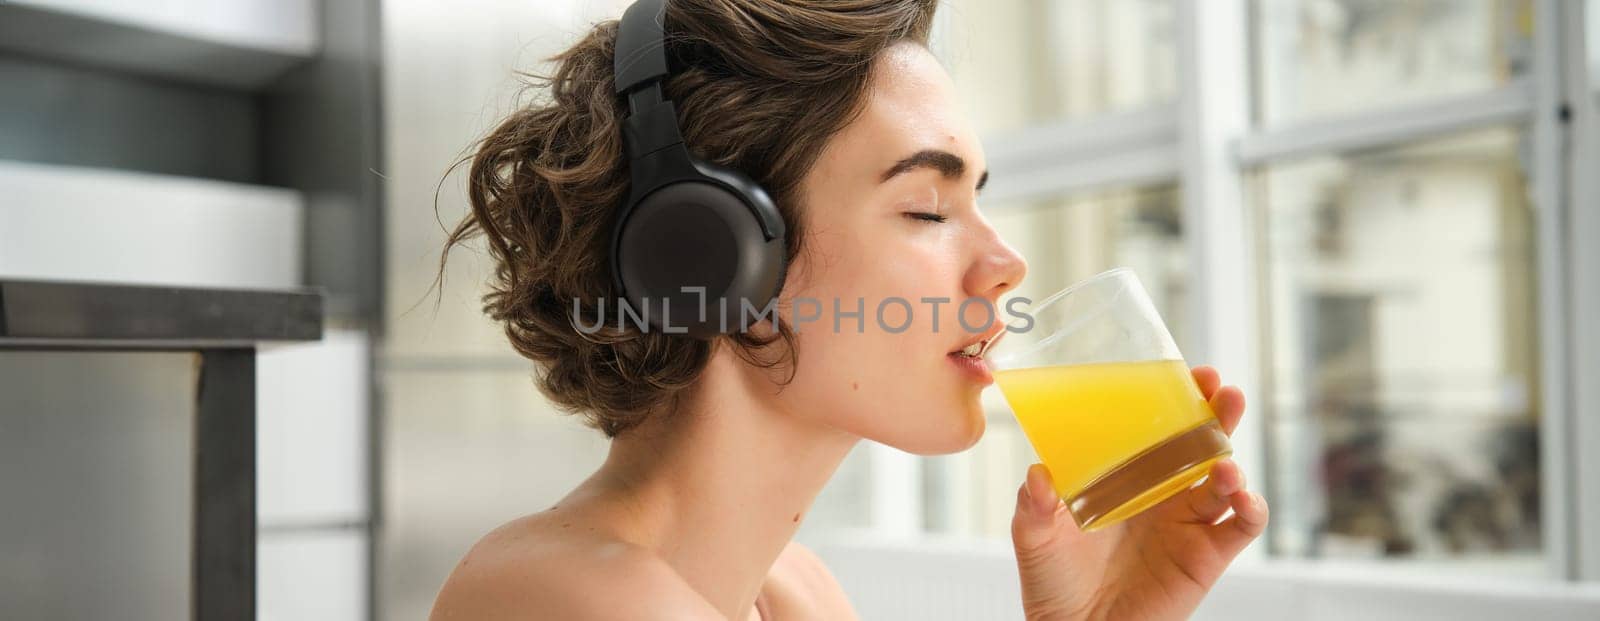 Smiling sportswoman, fitness girl does workout at home, wears headphones, listens music and drinks orange juice after training session.